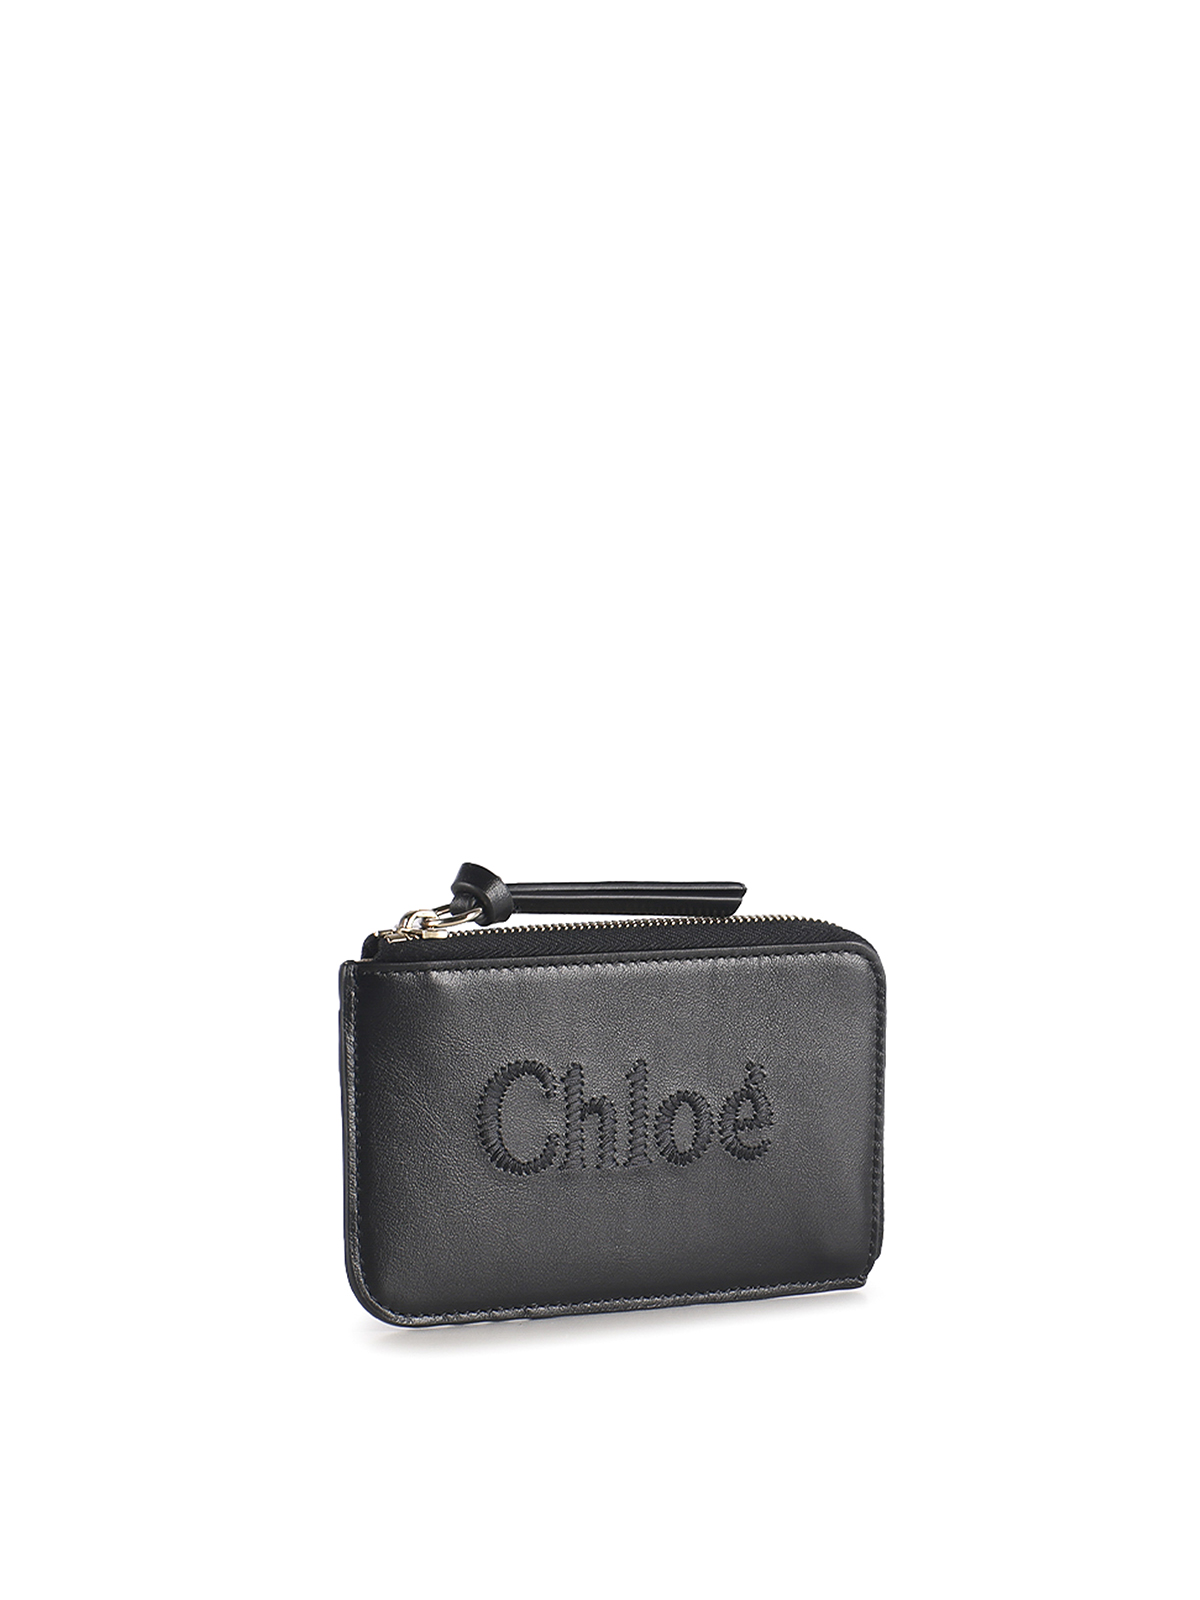 Authentic Chloe red Shoulder/Hand bag | Connect Japan Luxury